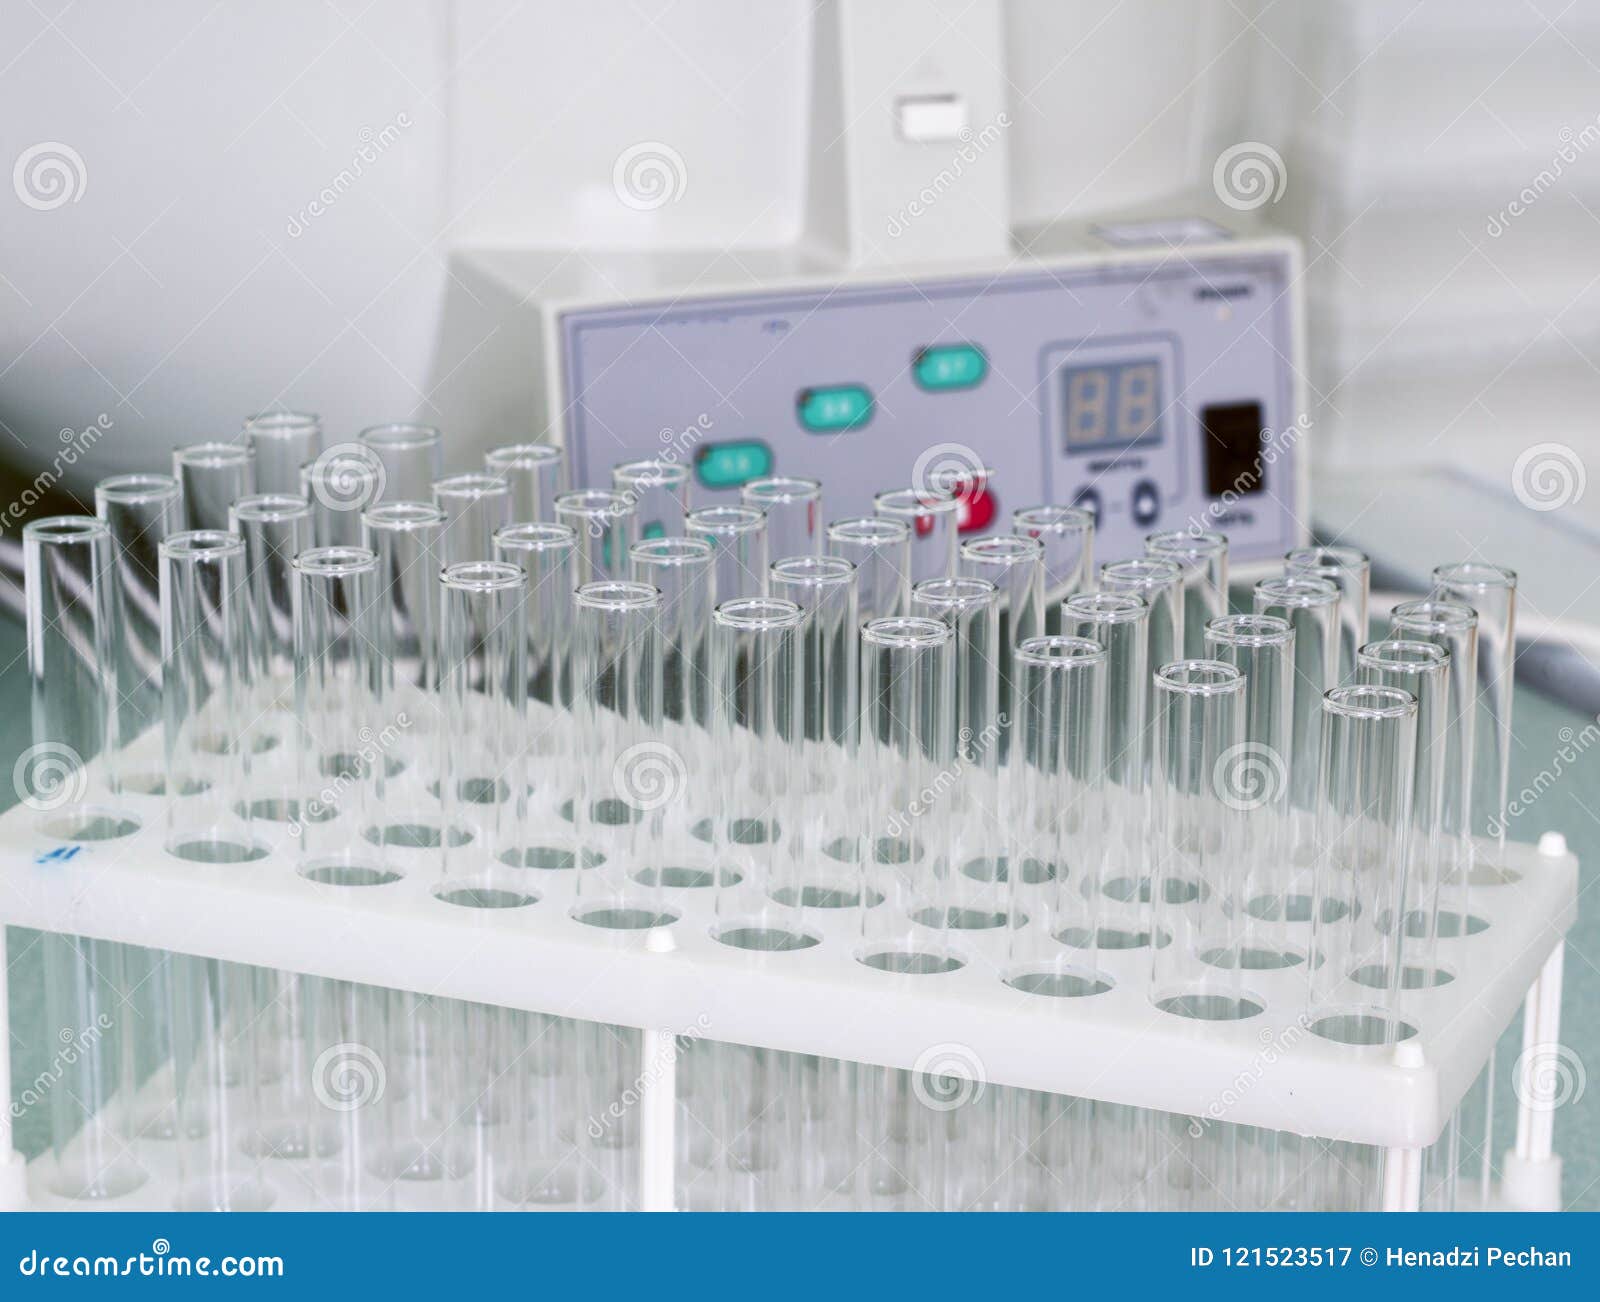 Empty Test Tubes For Blood On A Background Of Medical Devices Stock ...